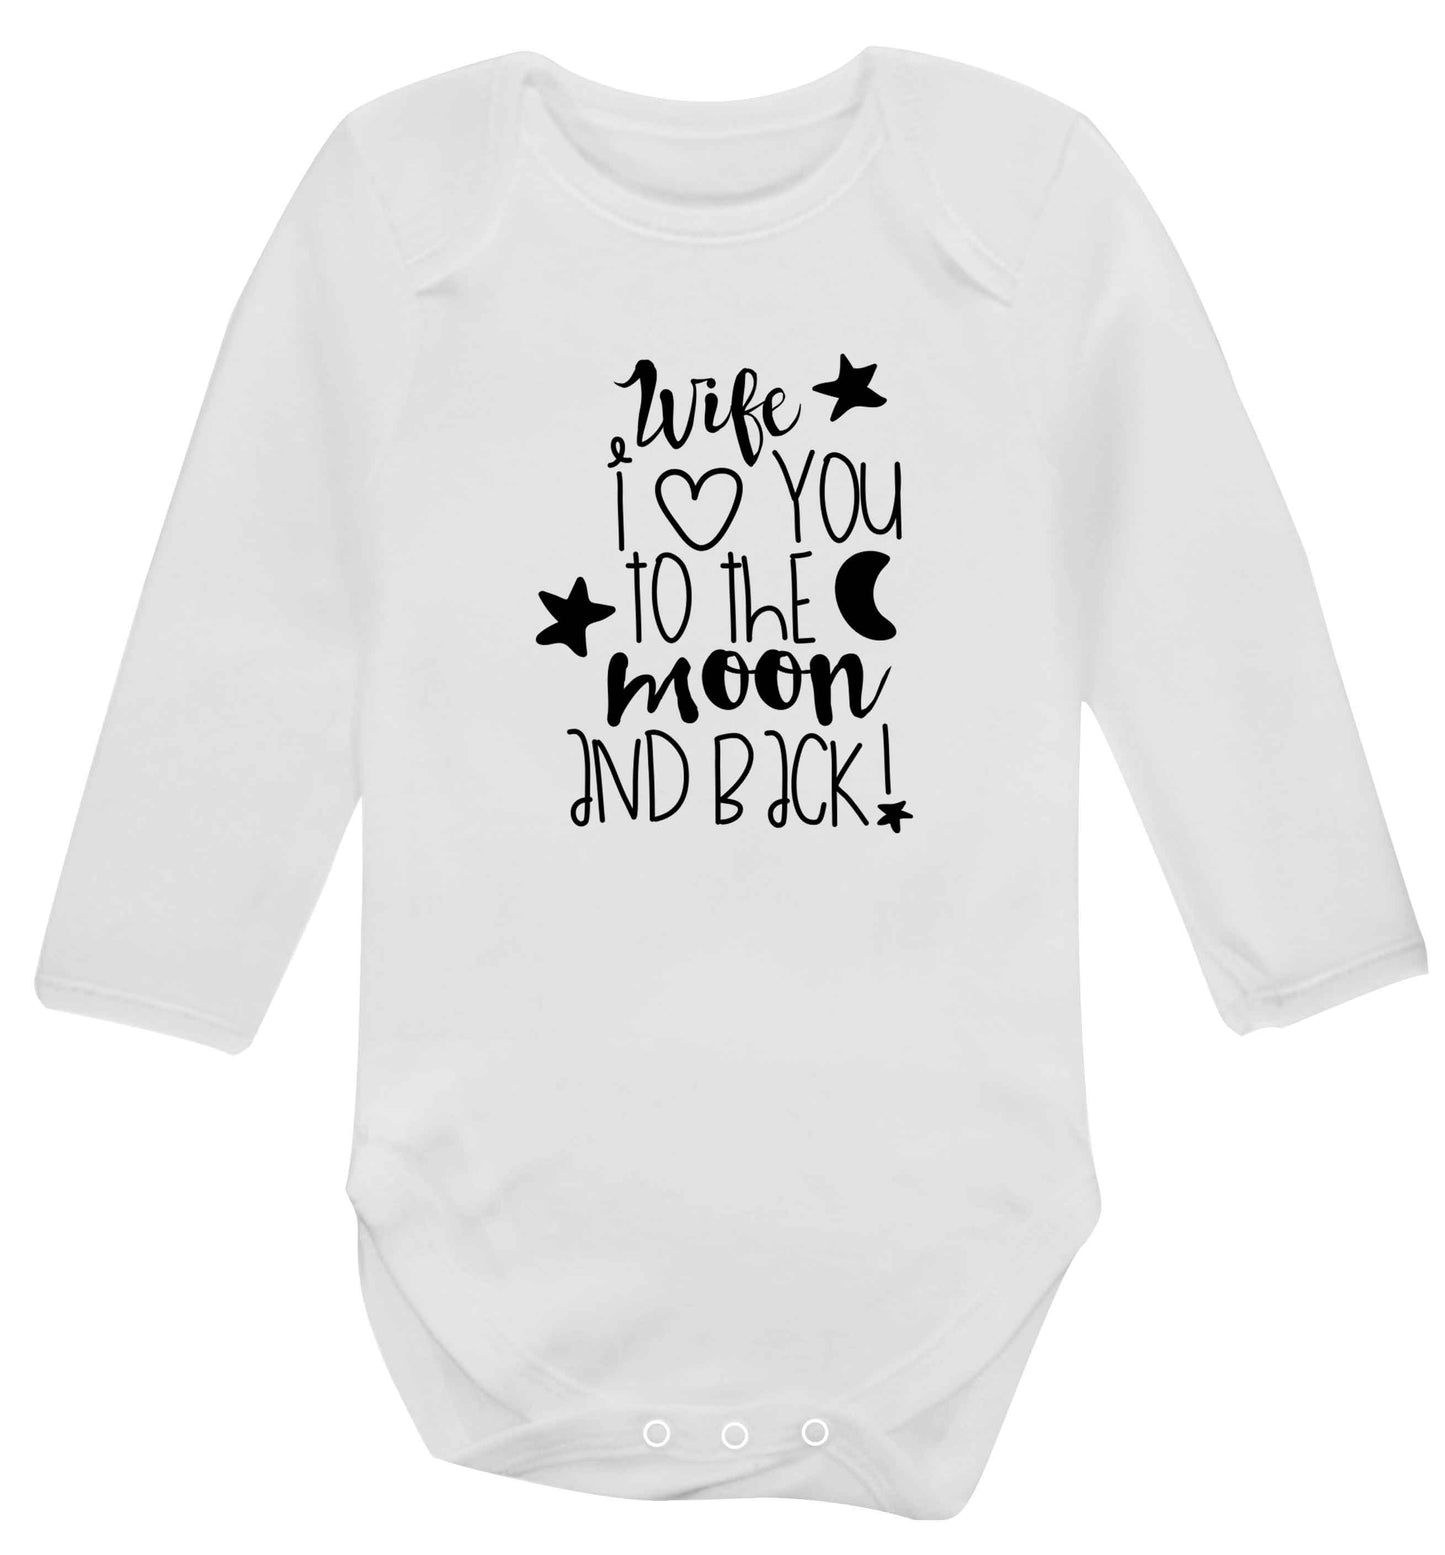 Wife I love you to the moon and back baby vest long sleeved white 6-12 months